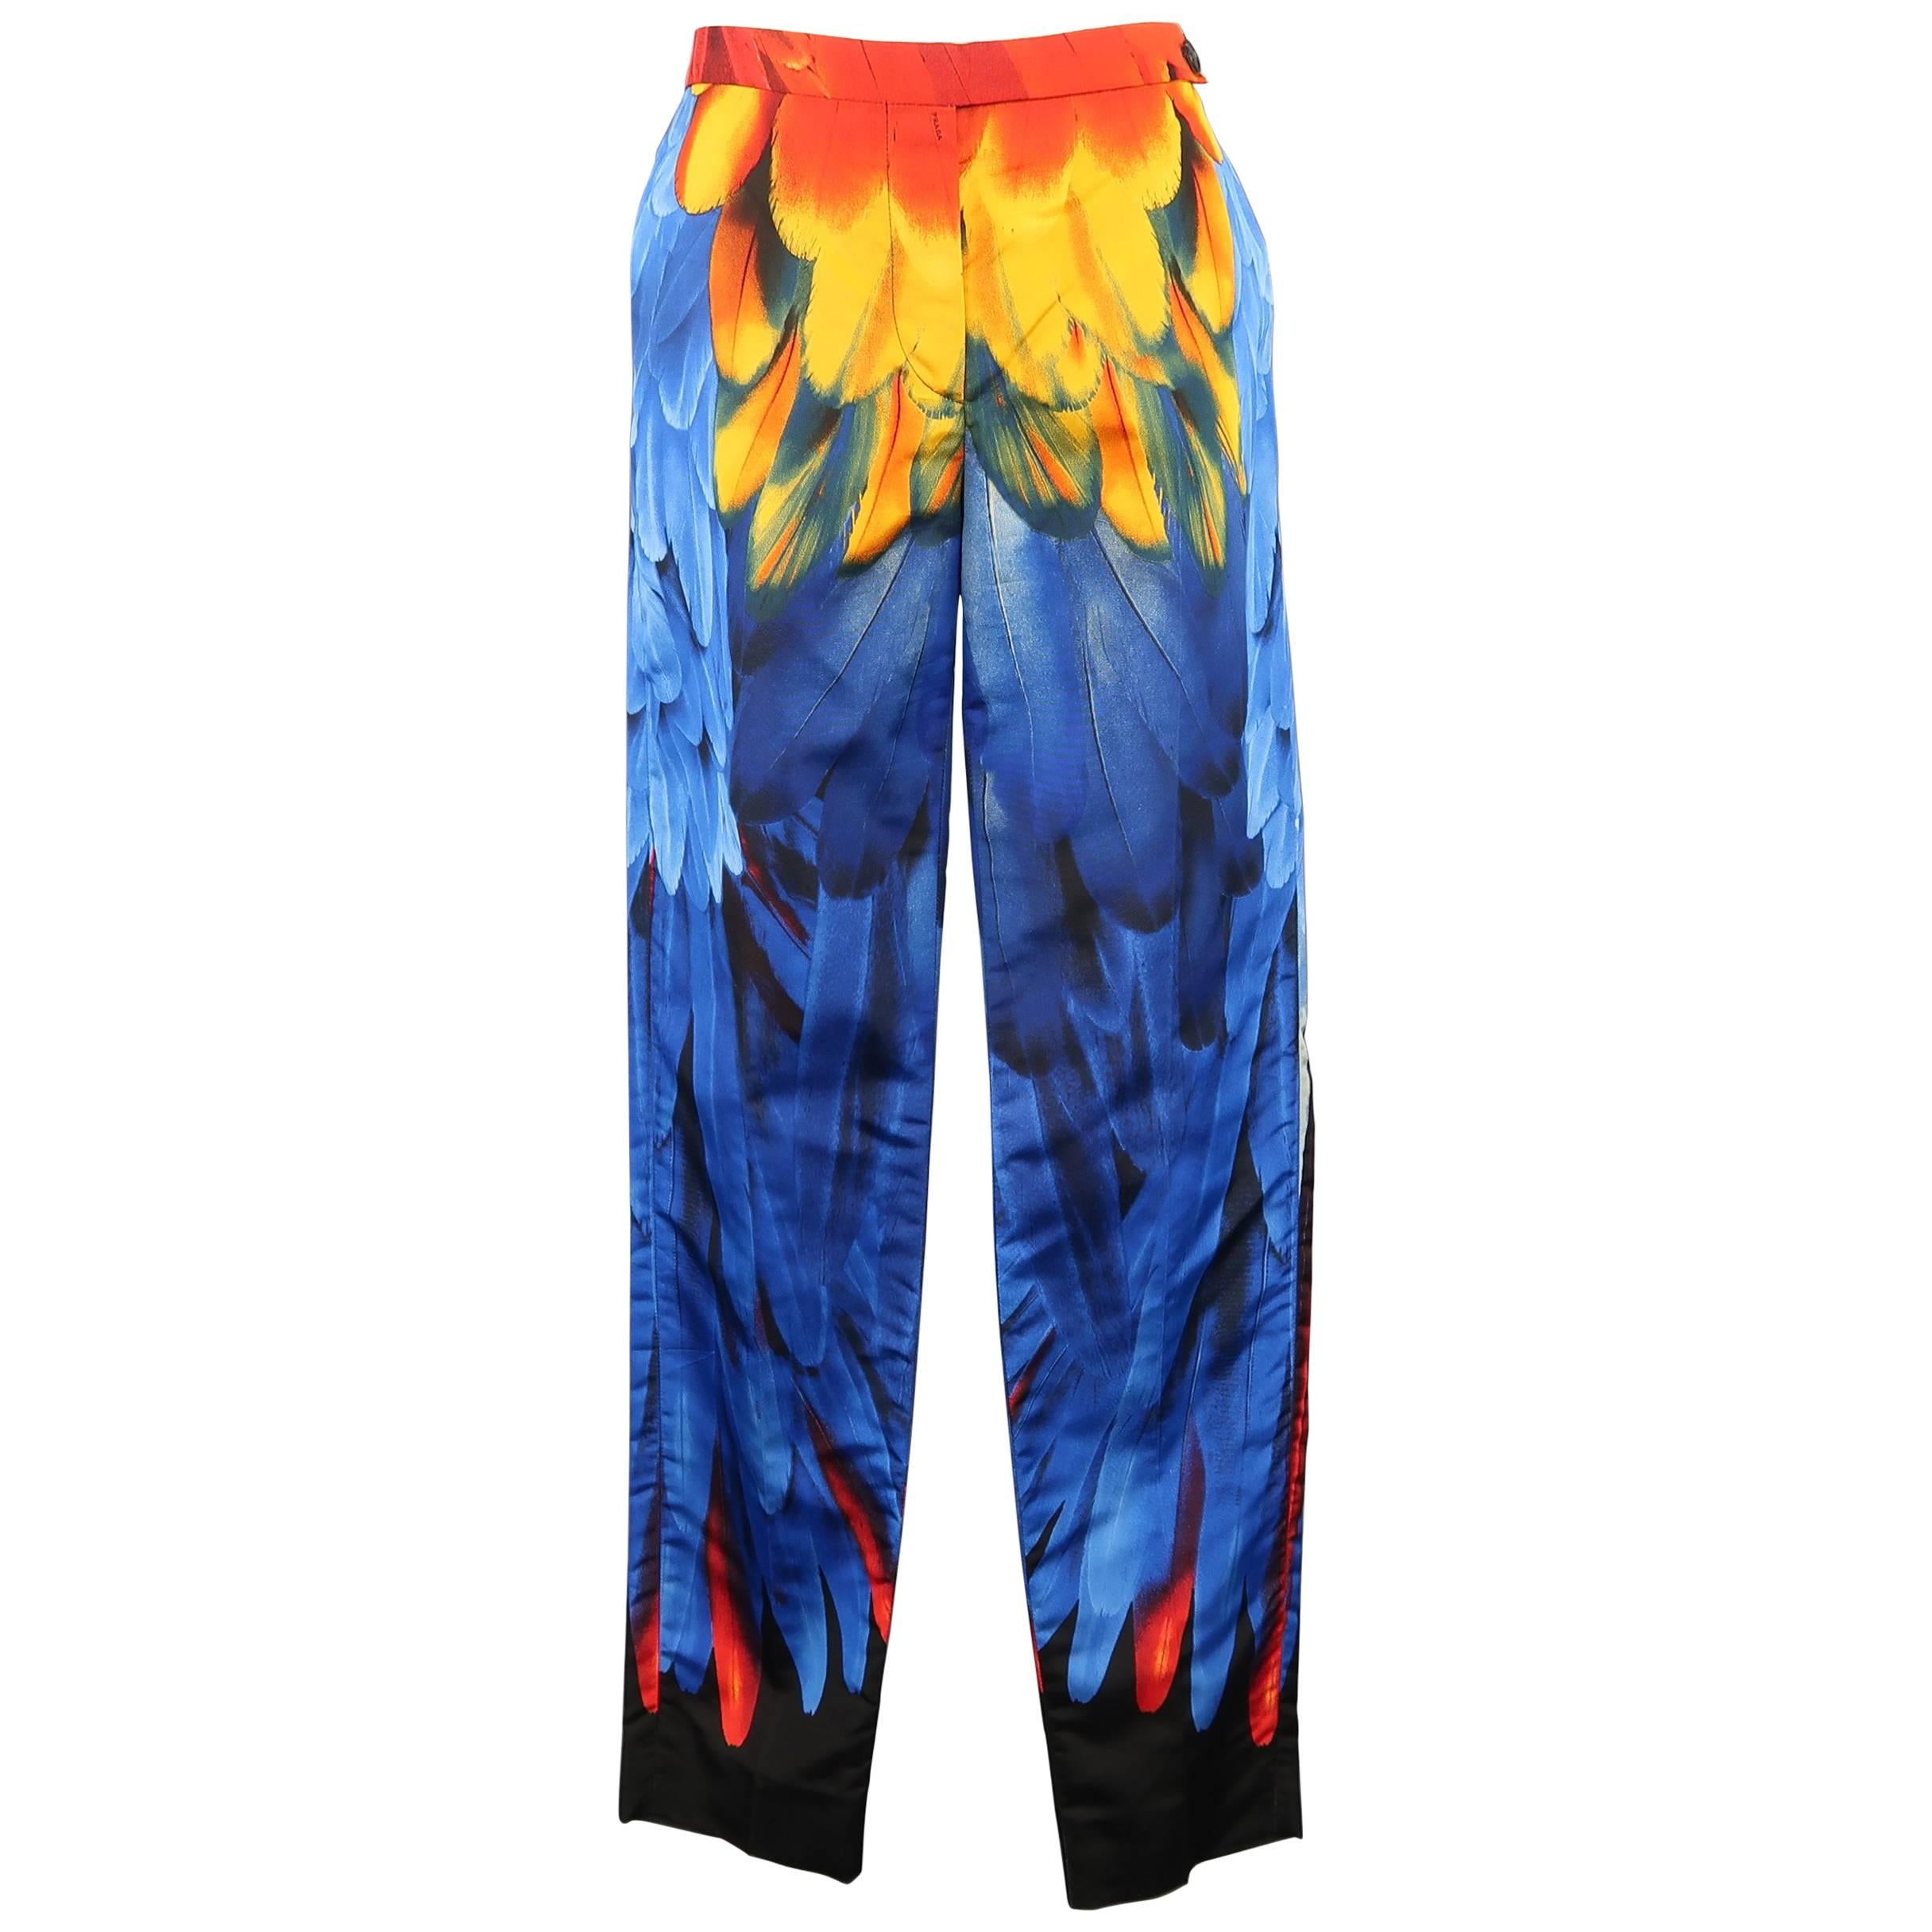 PRADA Pants - Spring 2005 Runway - Blue Red, Yellow Parrot Feather Silk Faille